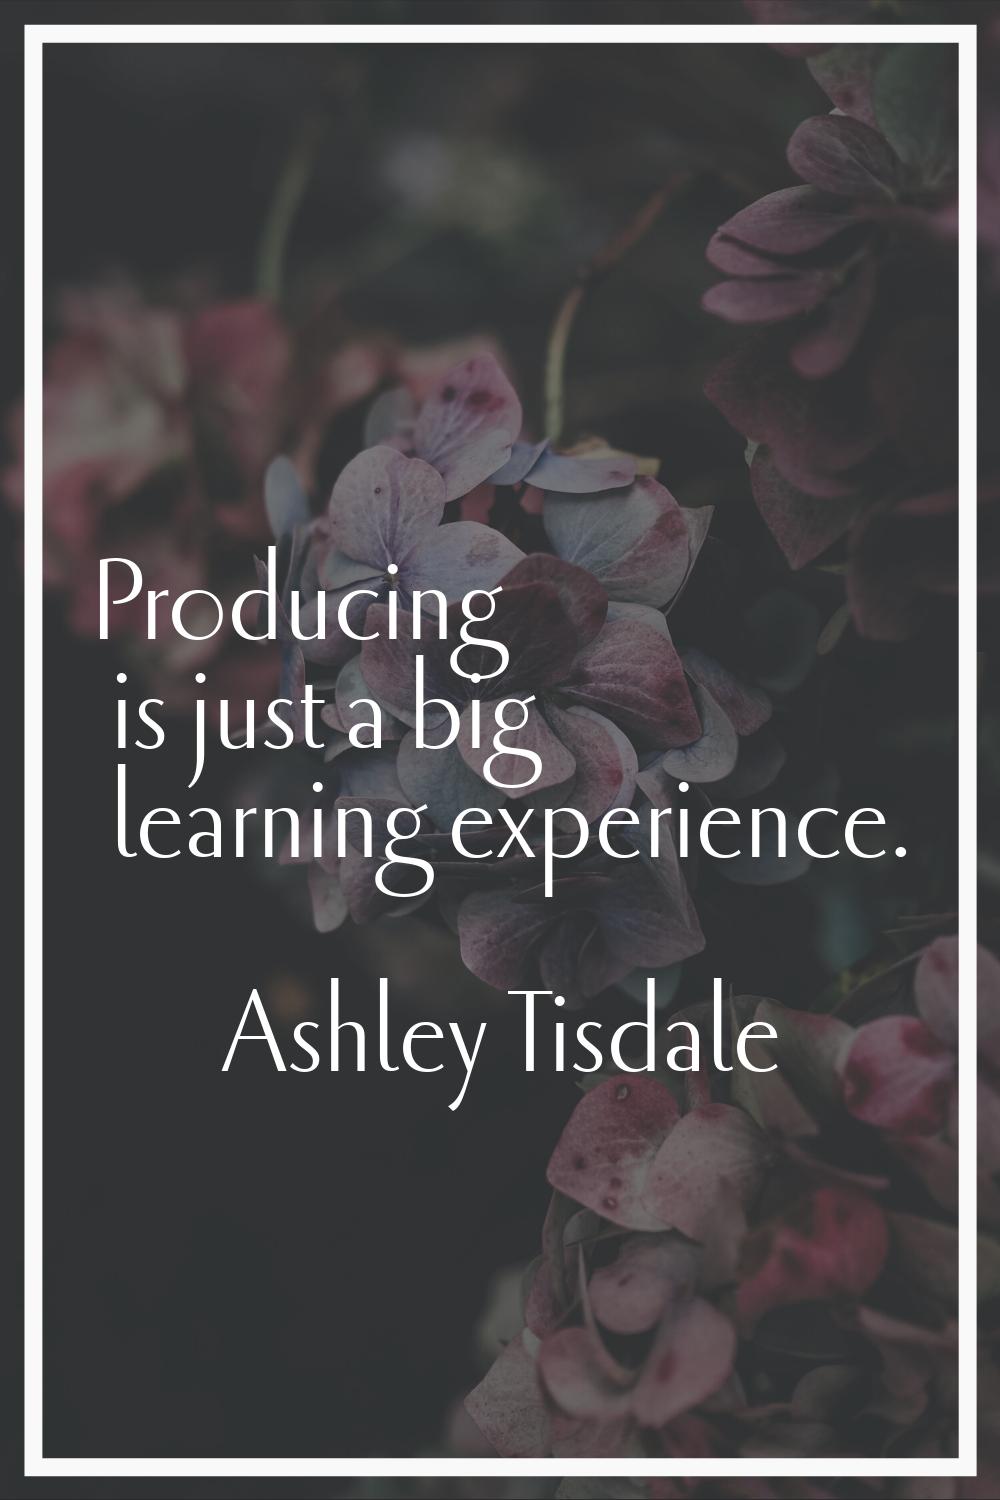 Producing is just a big learning experience.